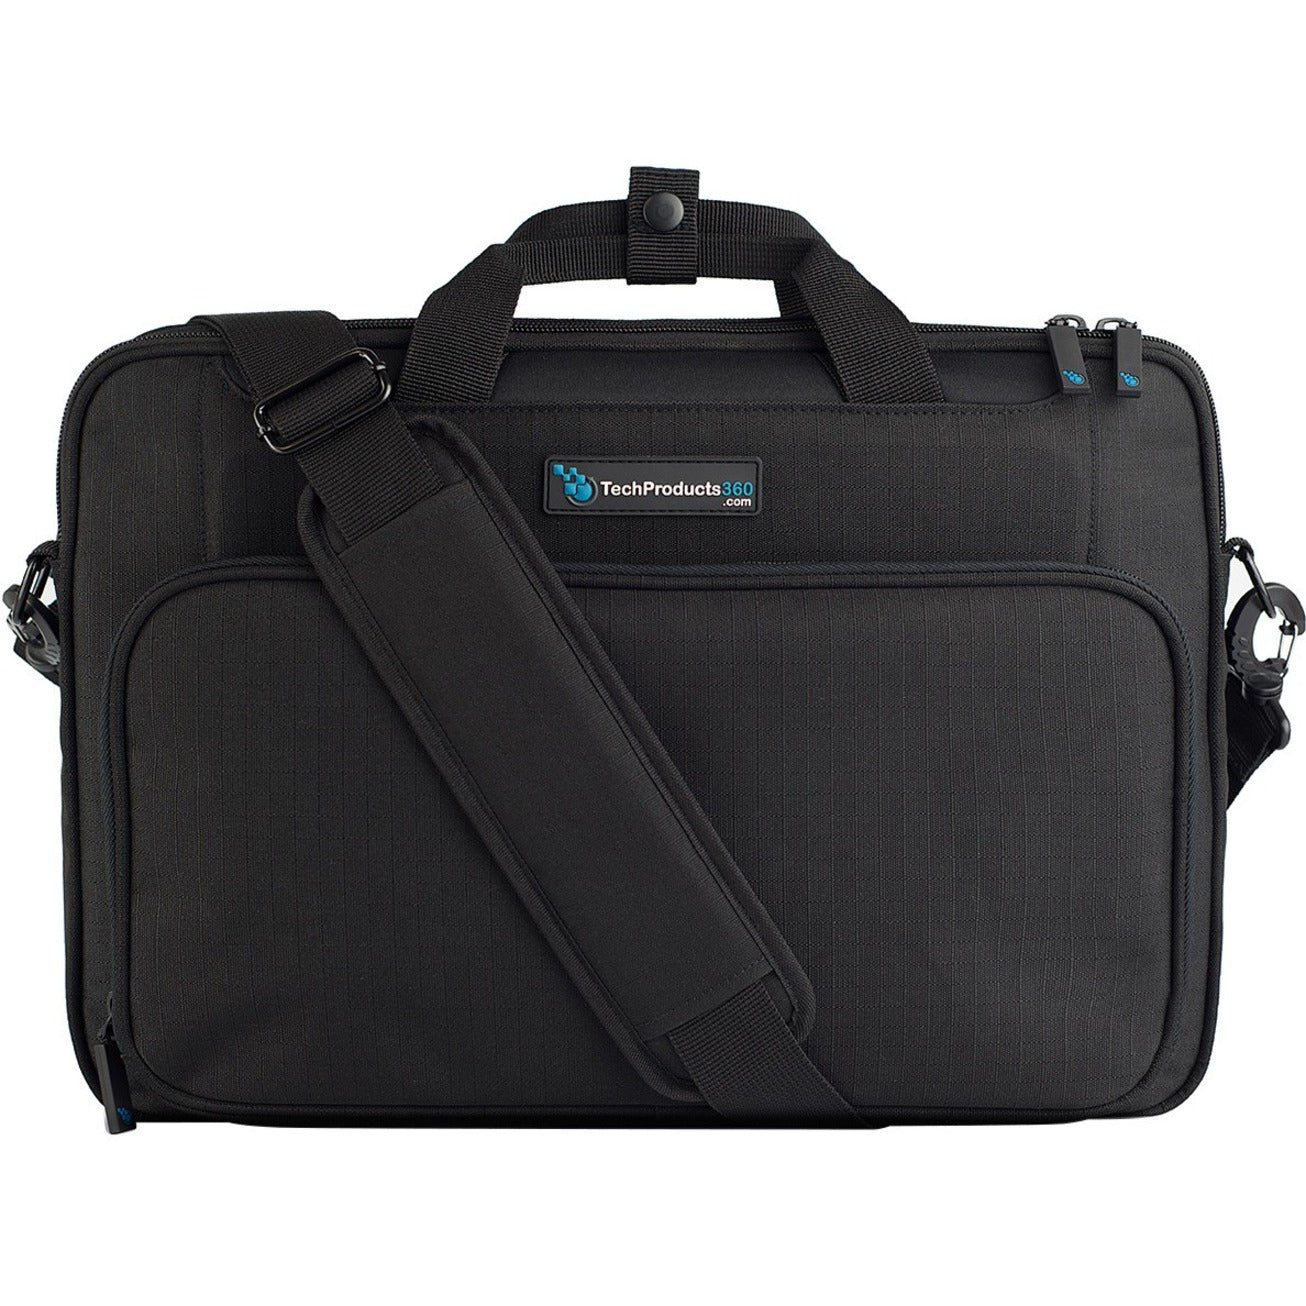 TechProducts360 Vault Carrying Case for 12" Notebook